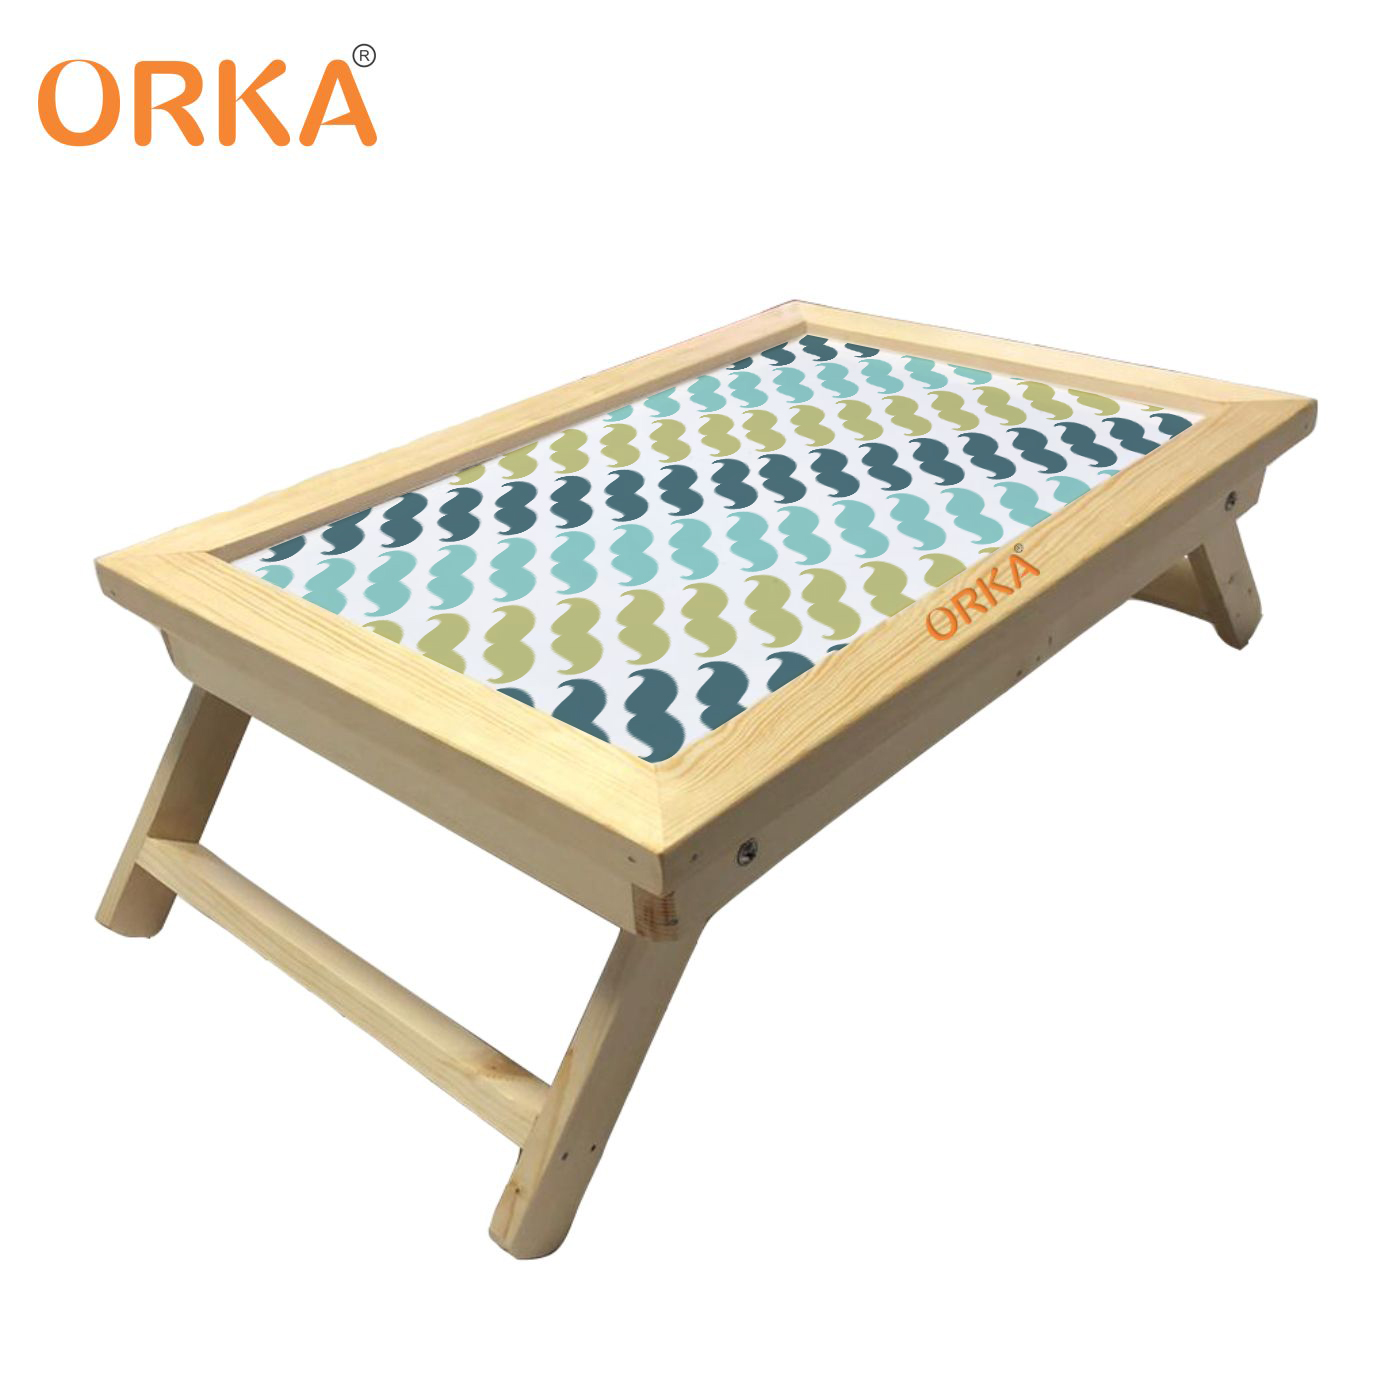 ORKA Blue, Green Mustache Foldable Multi-Function Portable Laptop Table - Blue, Green  